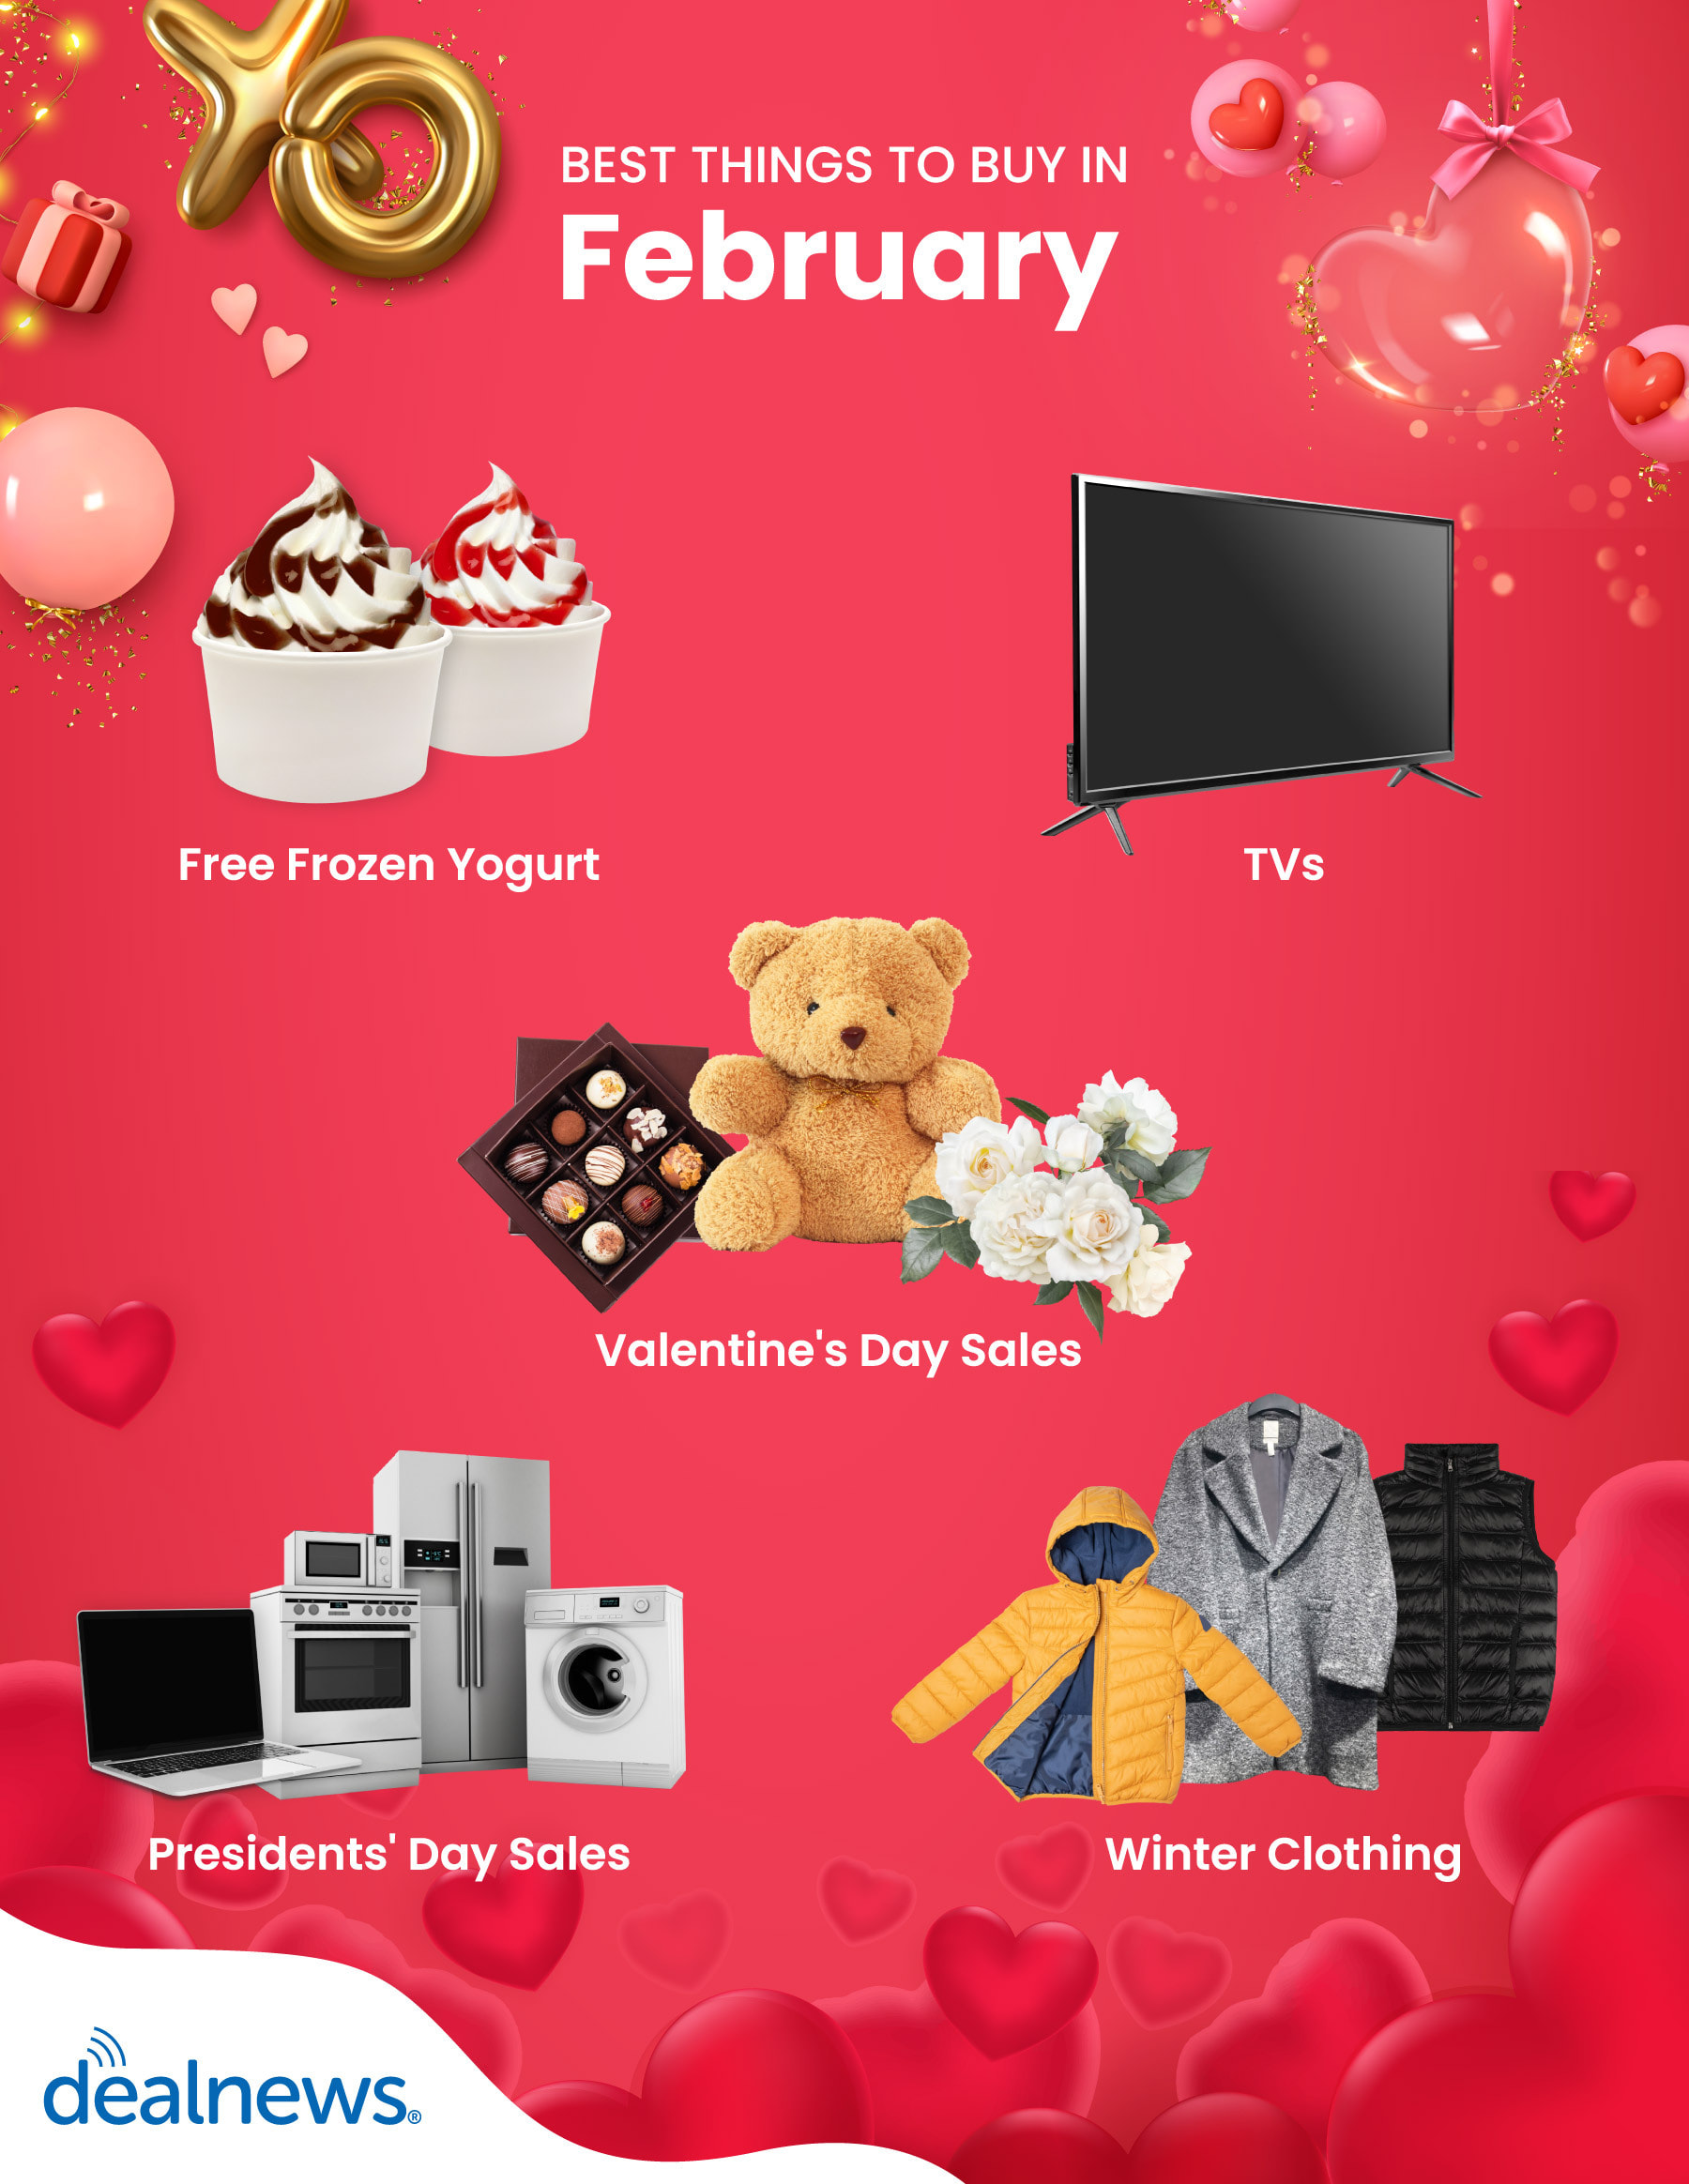 Five of the best things to buy in February depicted in an infographic.